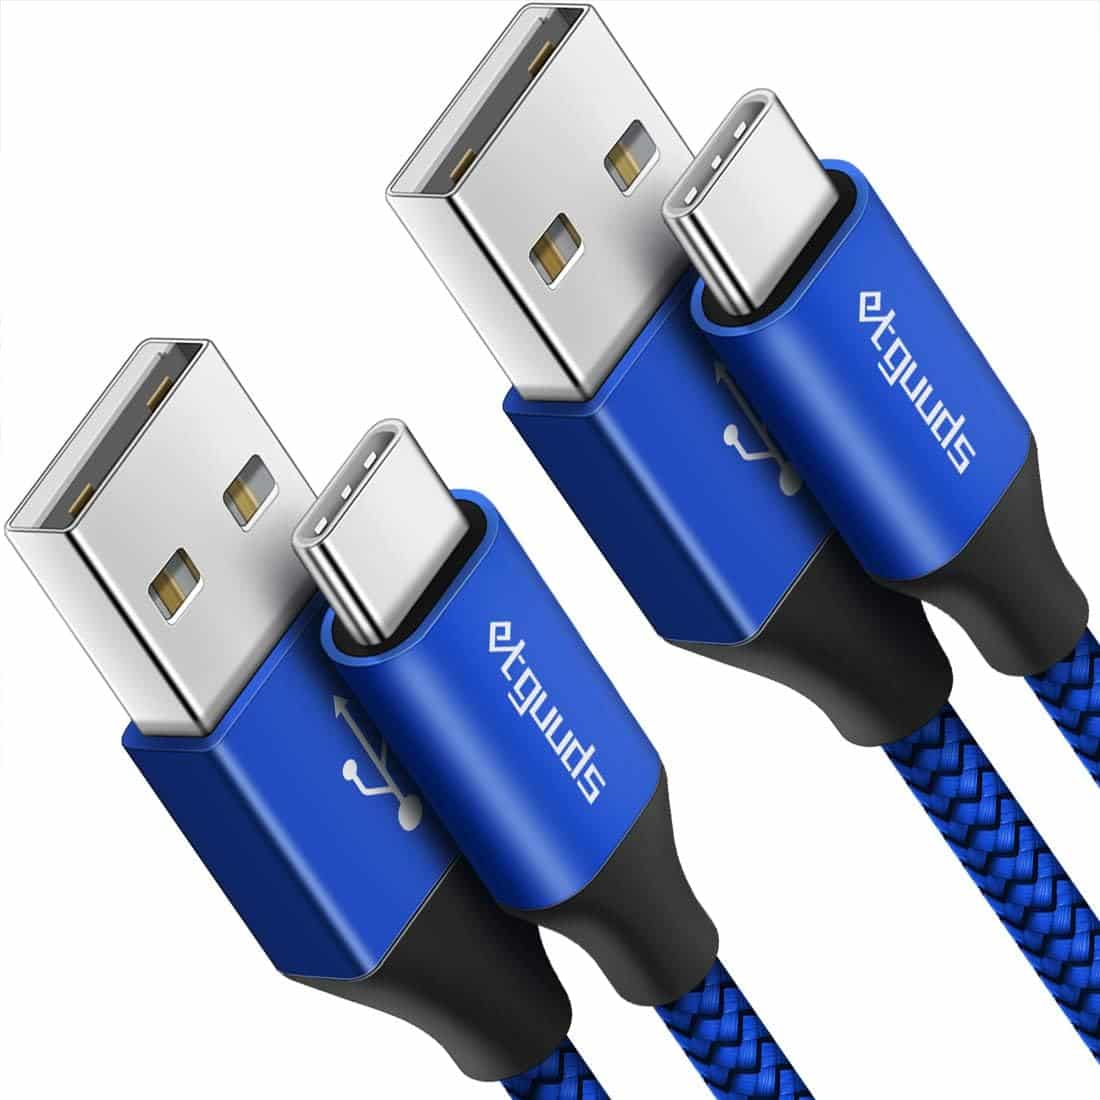 etguuds 6ft USB Type C Cable Review: Fast Charging and Durability at Its Best